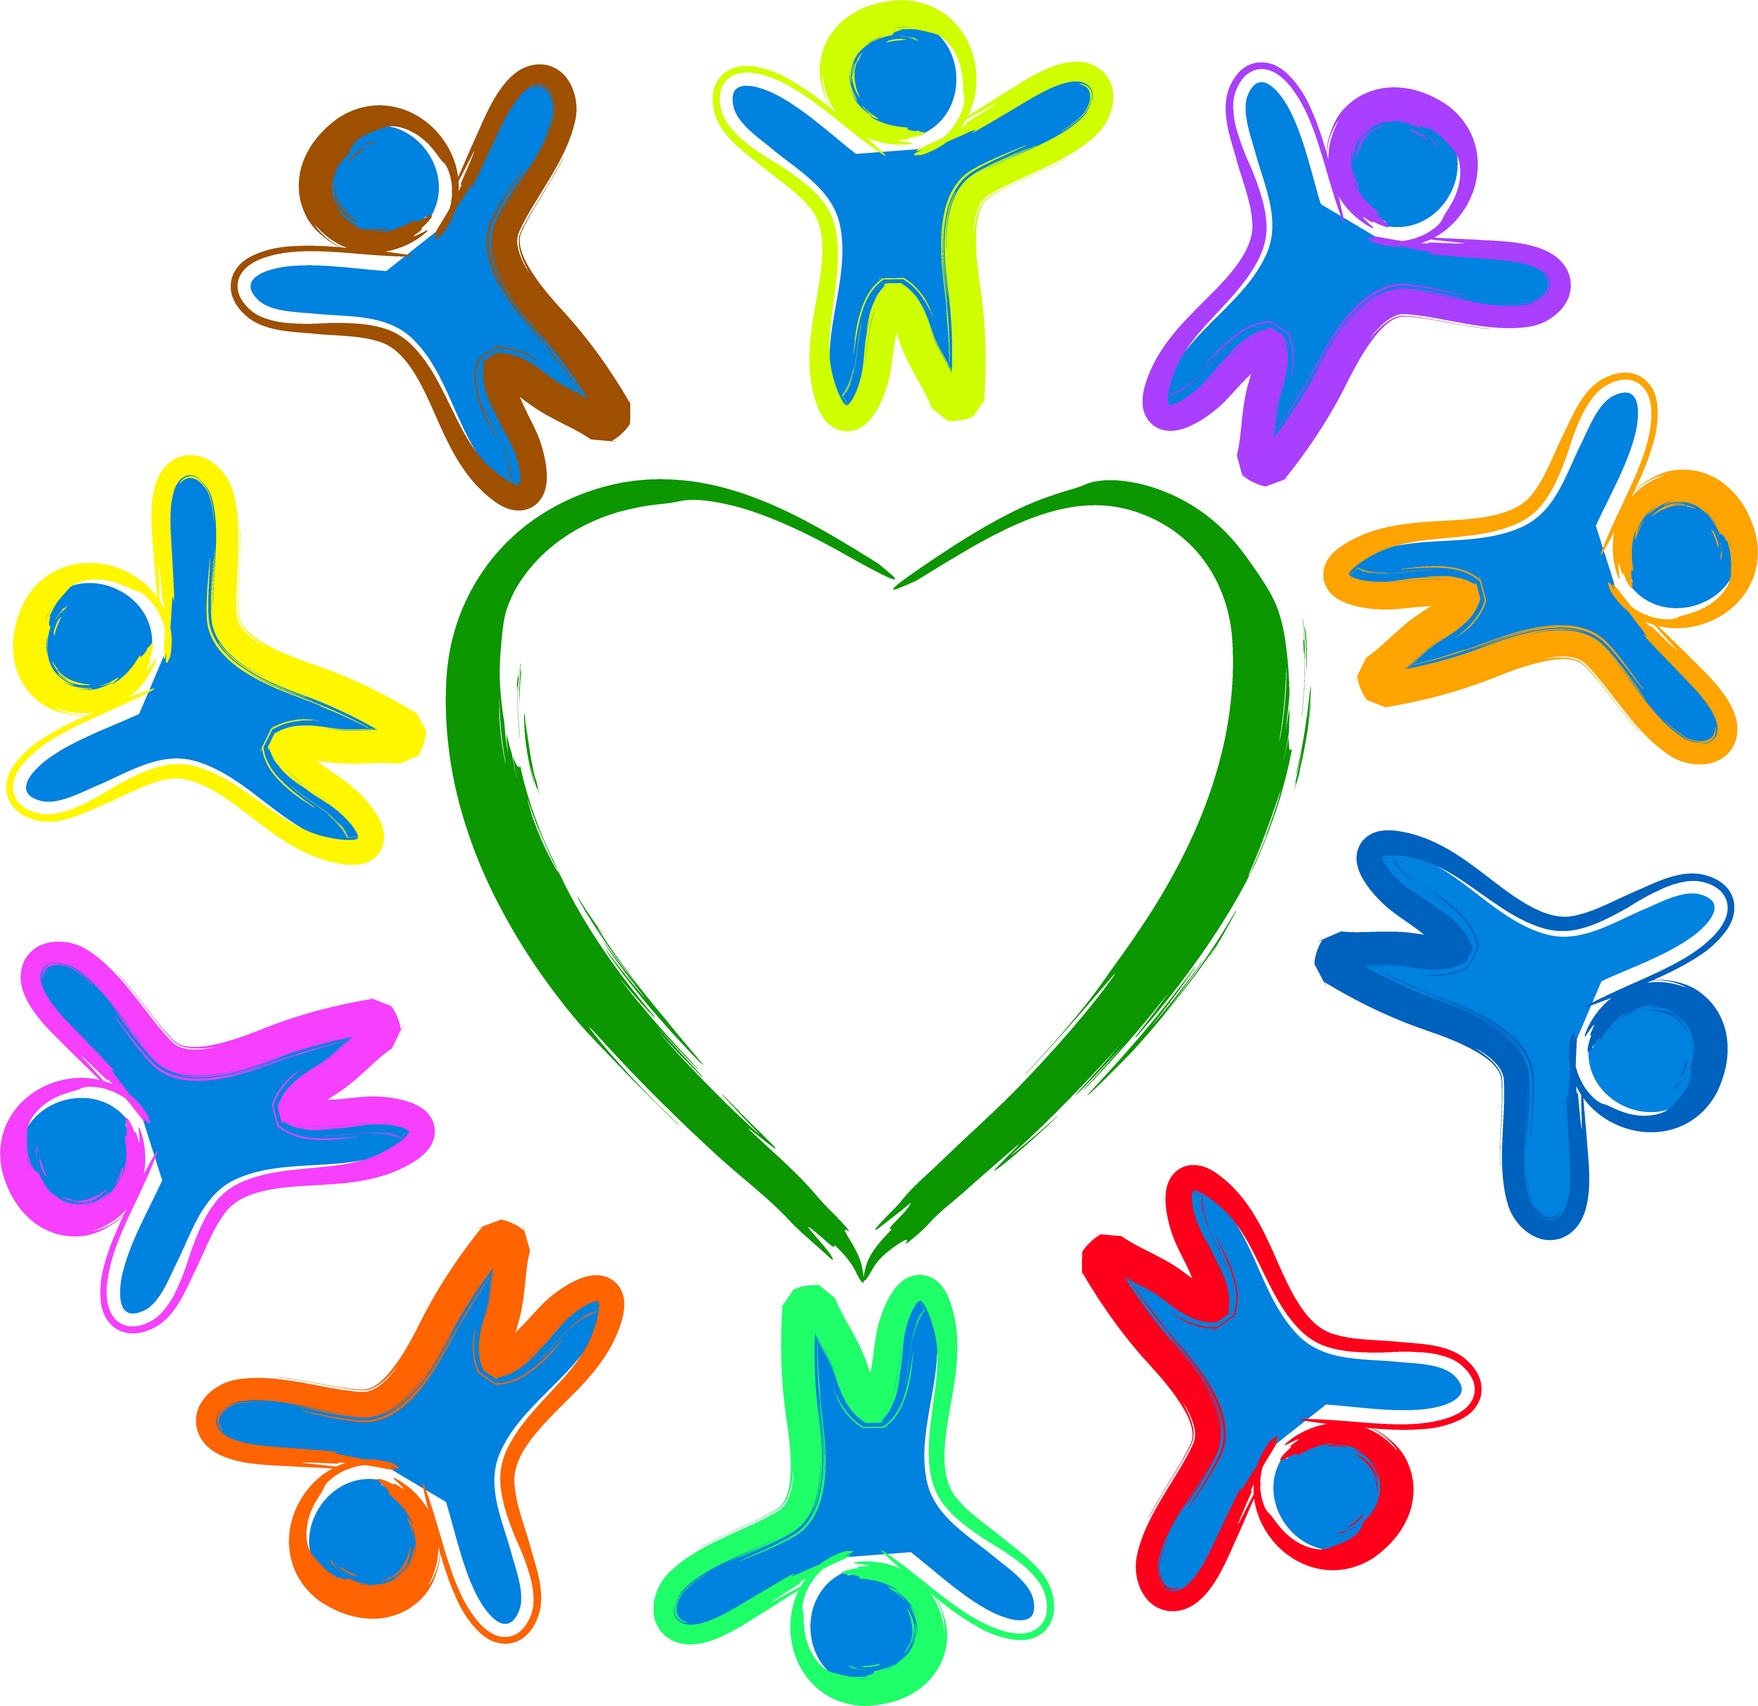 Pictures Of People Helping People - Clipart library